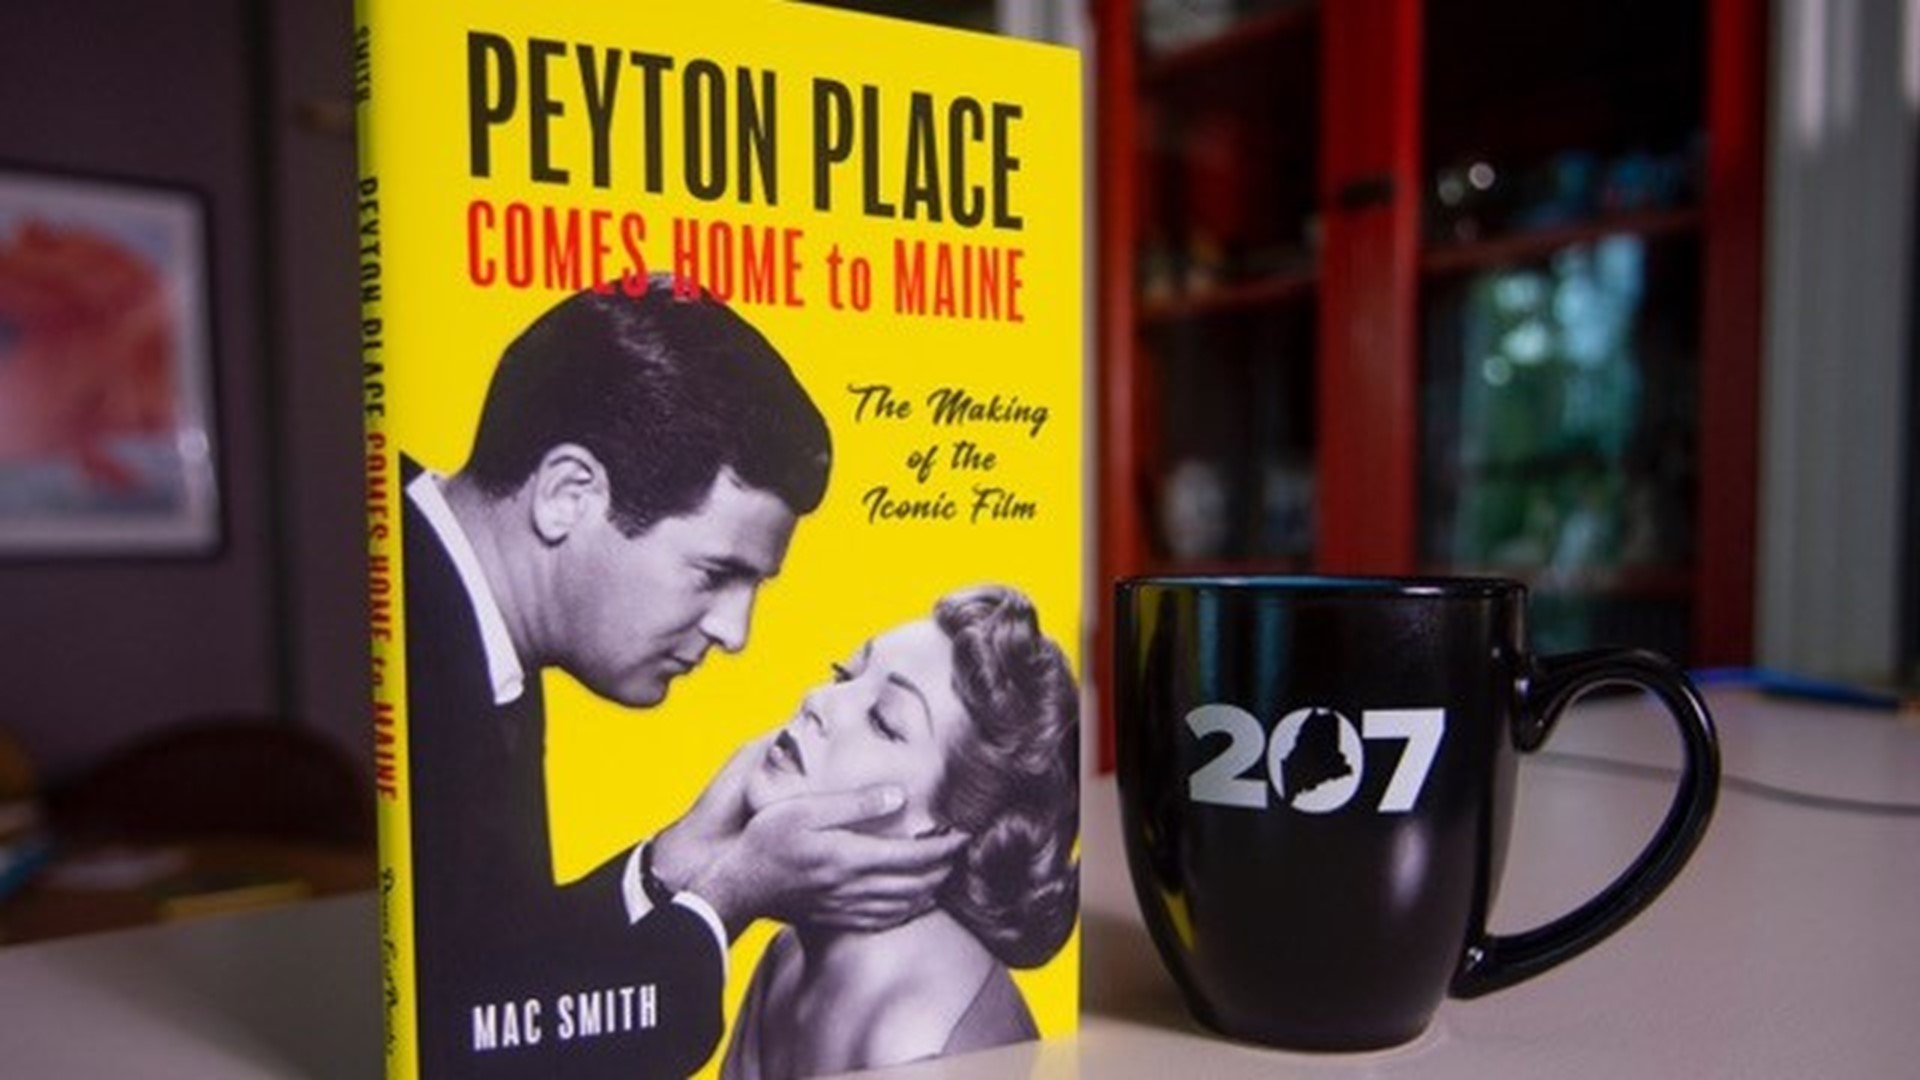 Author and Historian Mac Smith writes "Peyton Place Comes Home to Maine"